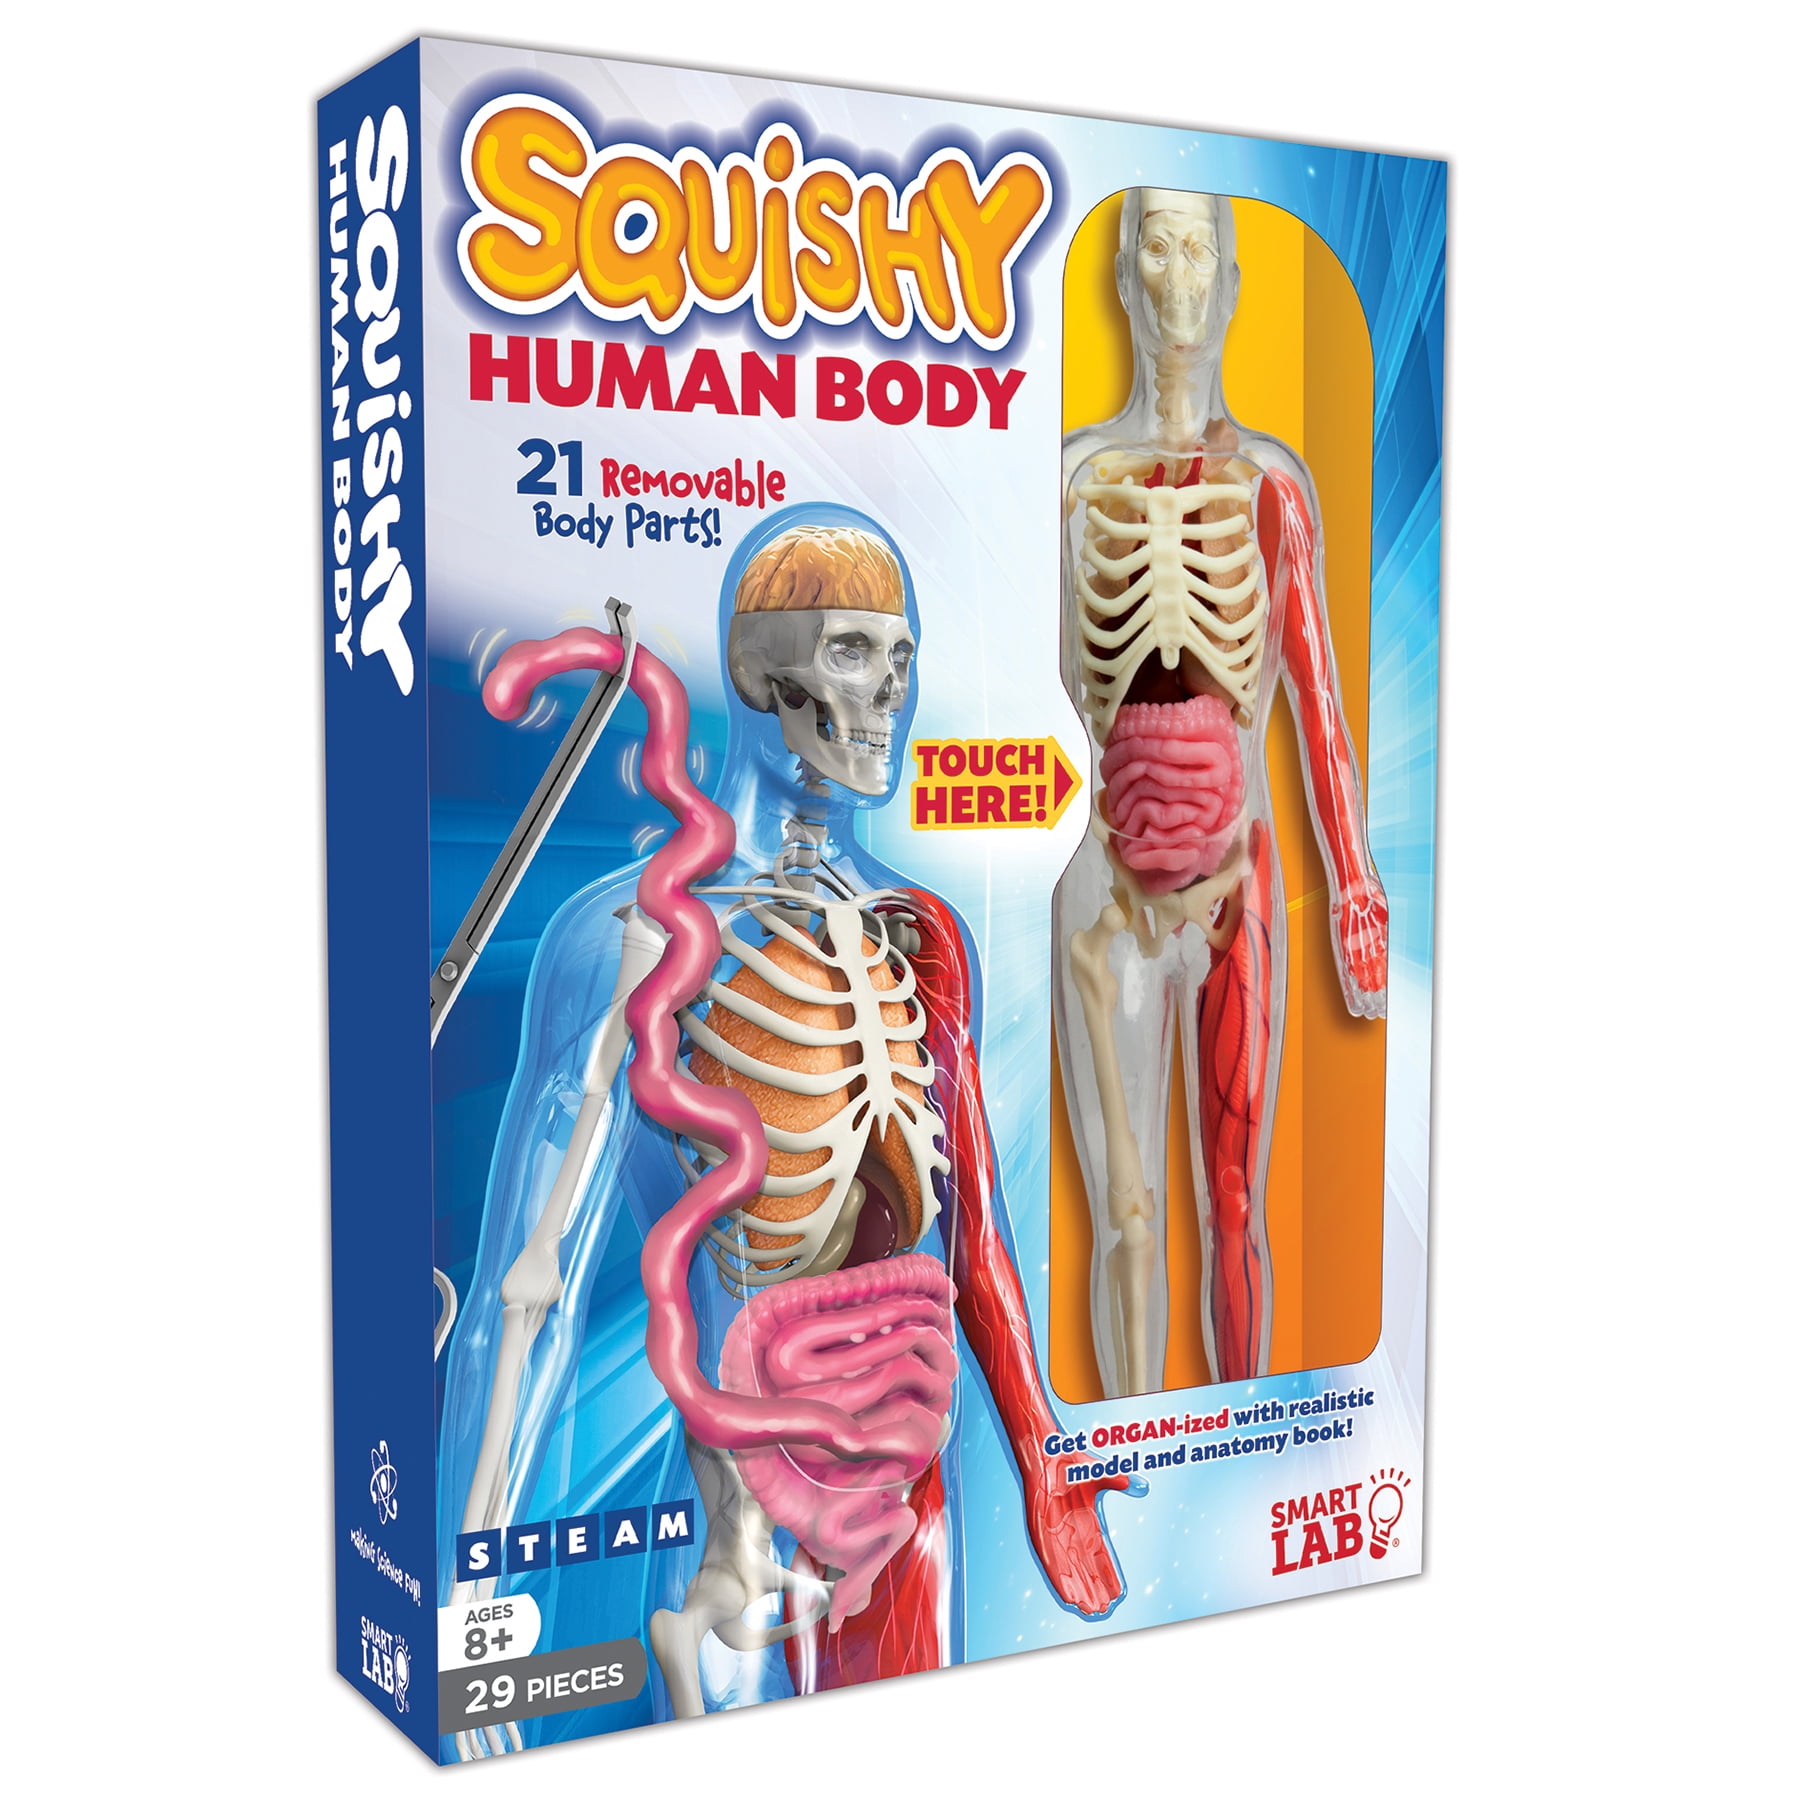 NEW Anatomy Foam Puzzle of The Human Skeleton Educational Toy 